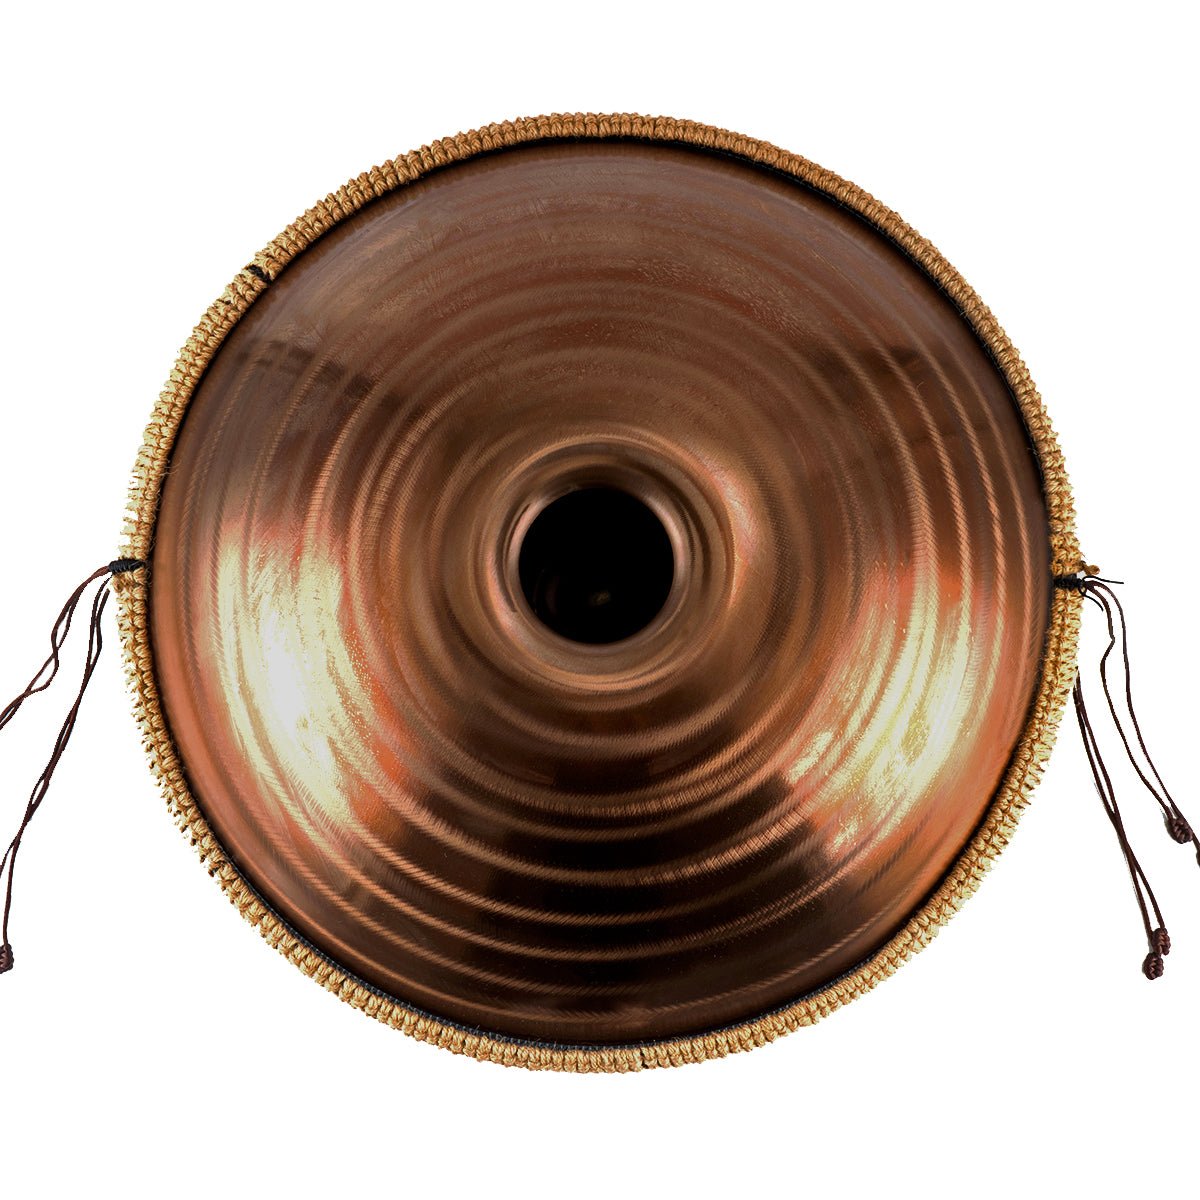 AS TEMAN Handpan Desert 10 Notes D Minor Scale Glare hangdrum with gift set - AS TEMAN